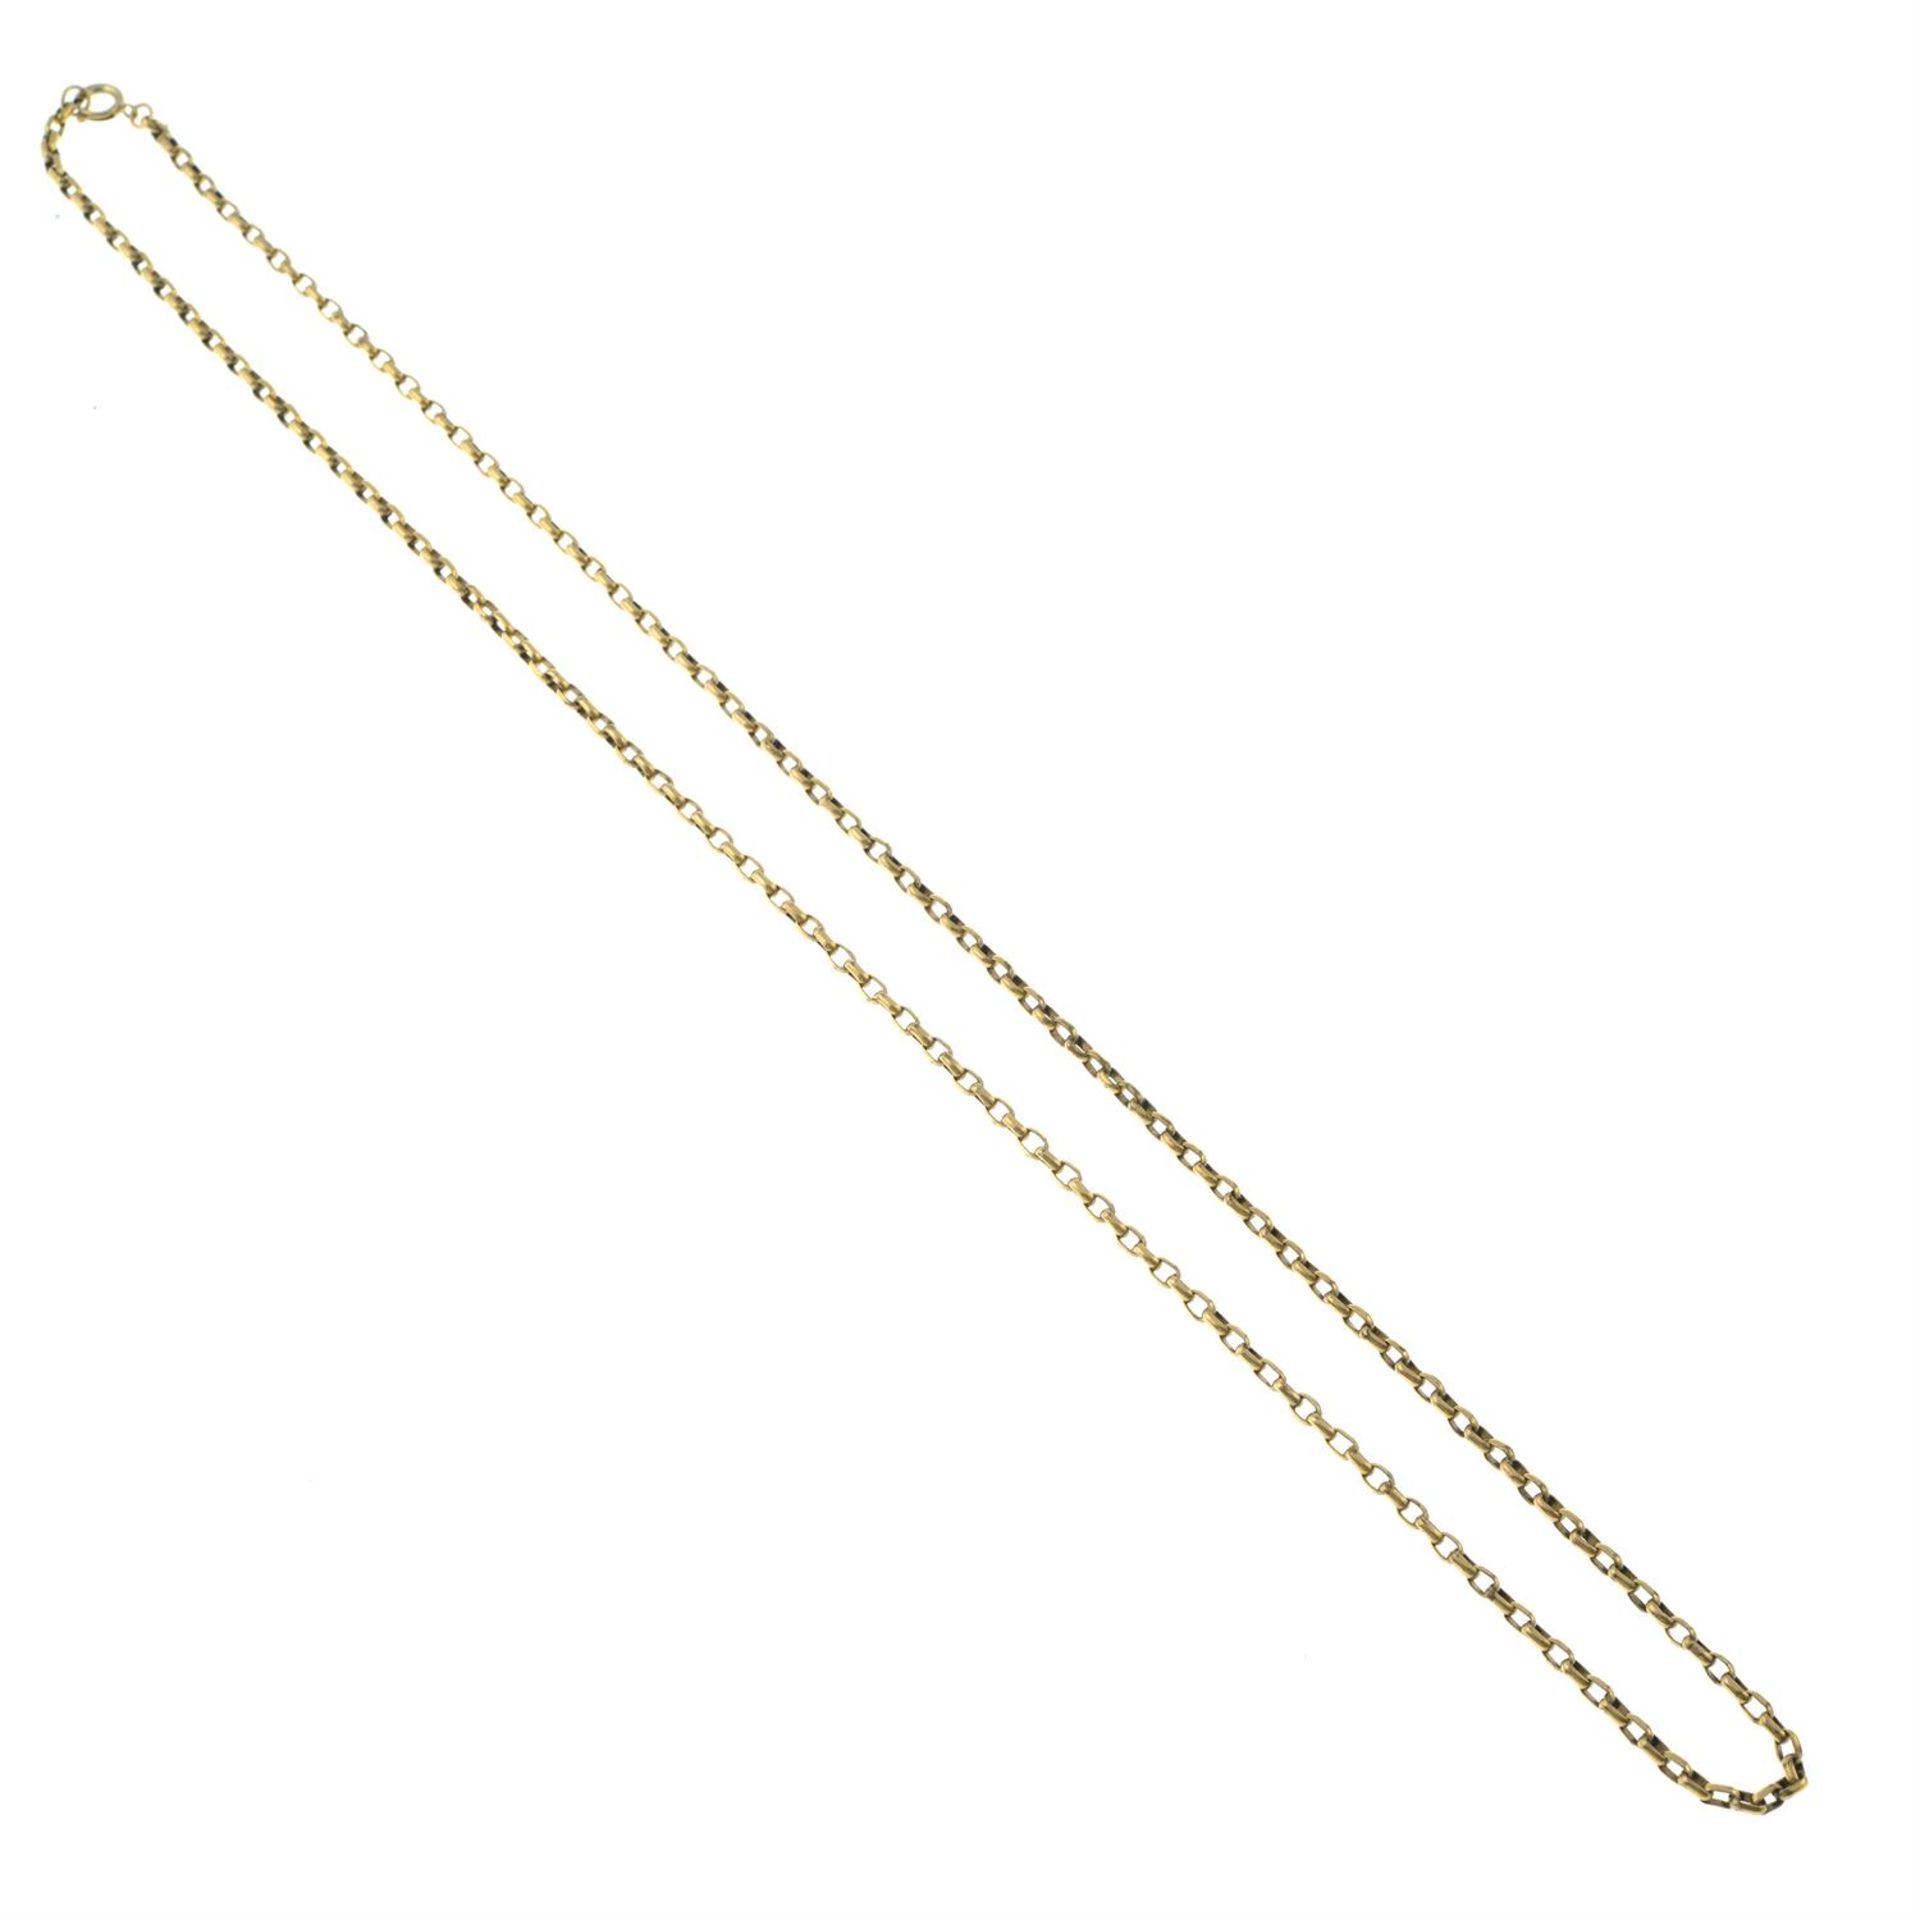 Early 20th century 9ct gold longuard chain.